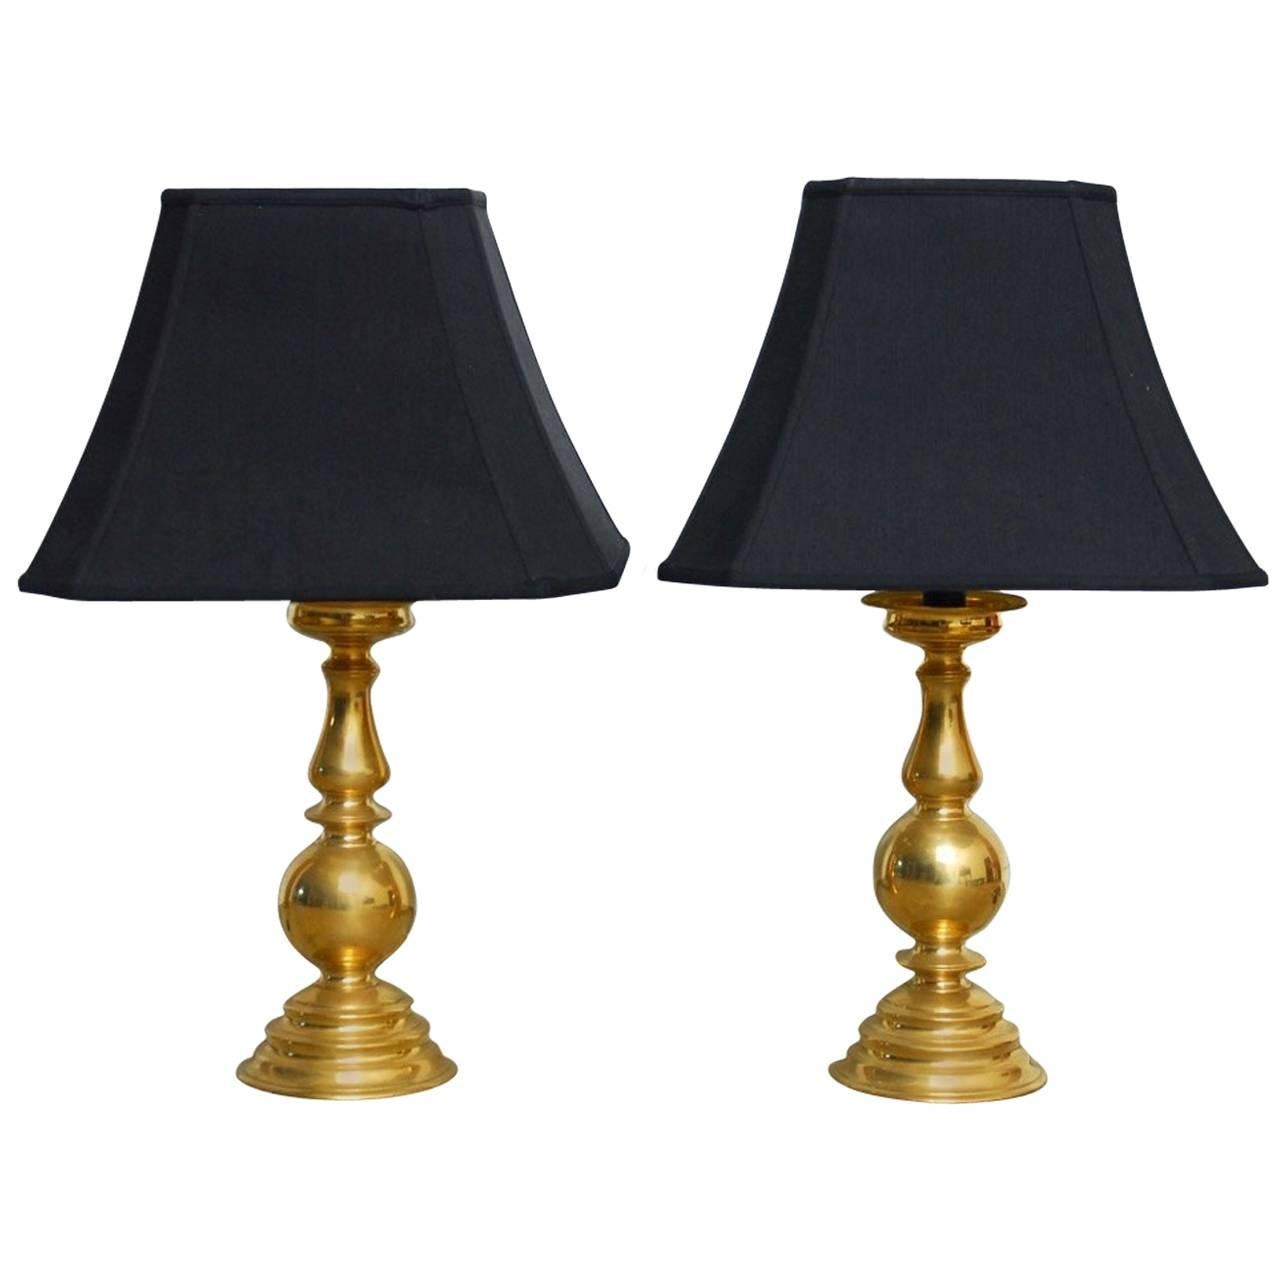 Pair of Polished Brass Baluster Form Candlestick Lamps